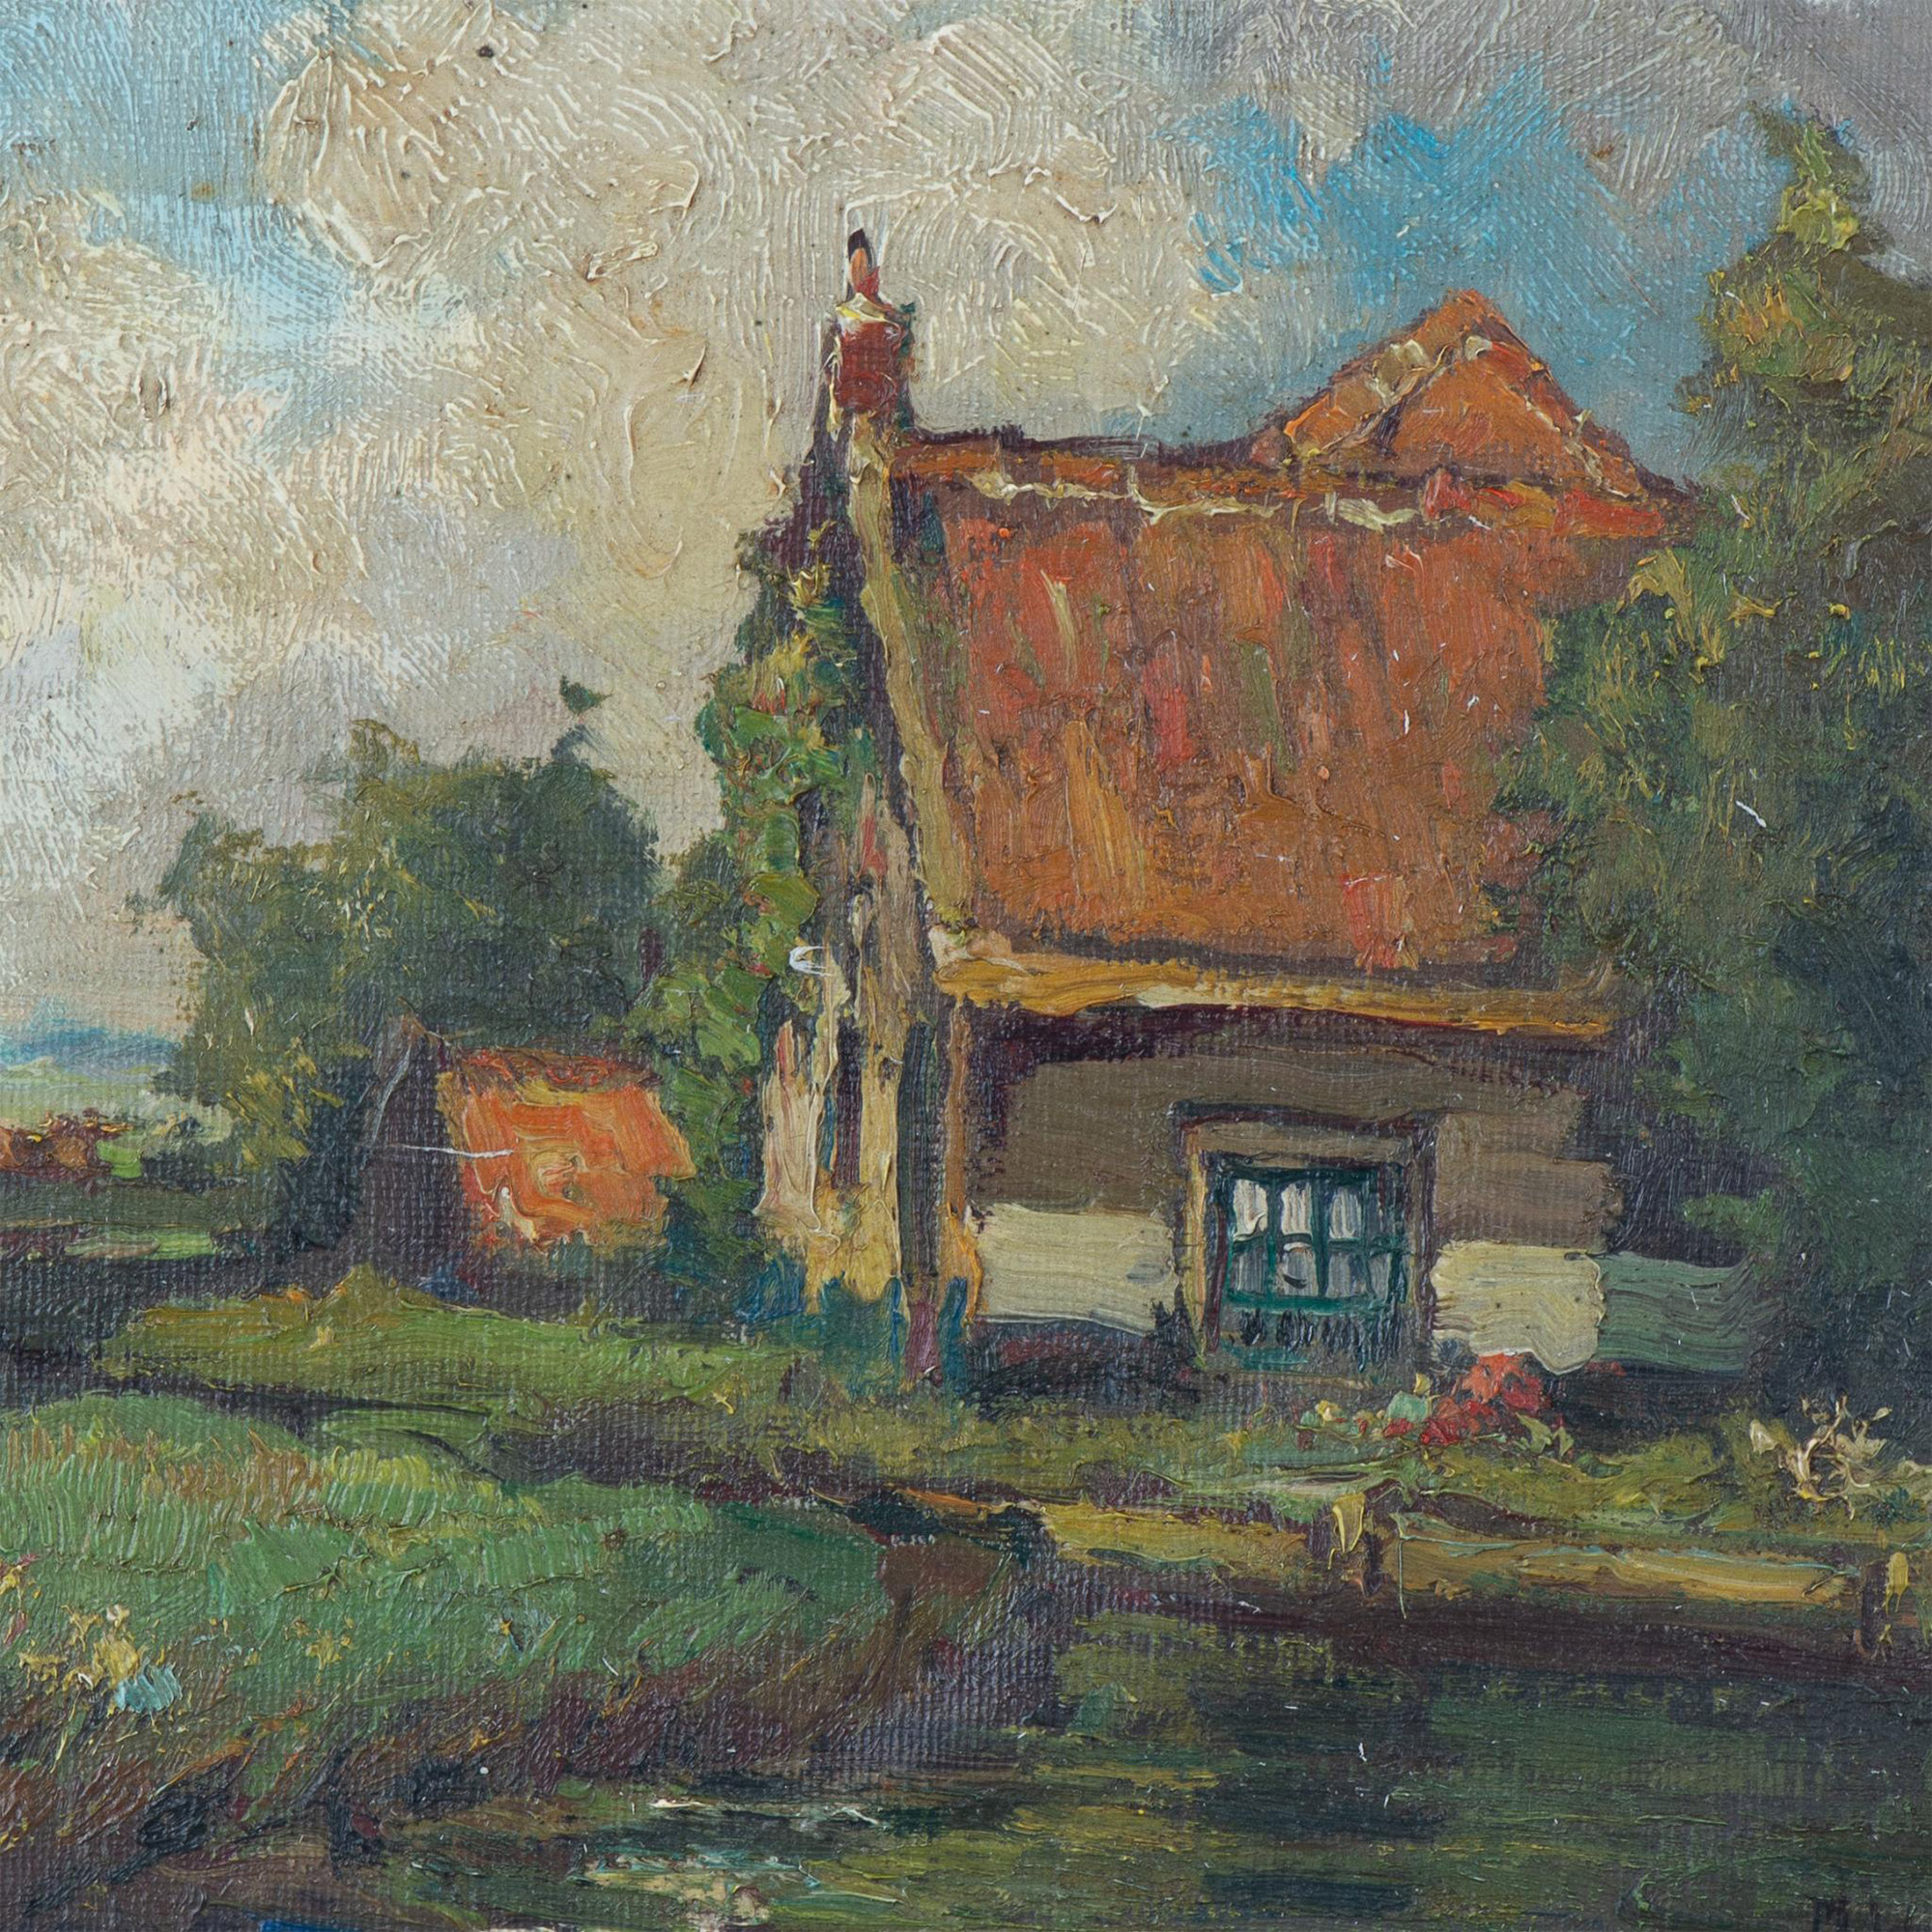 Original Oil on Wooden Board, Picturesque Farm, Signed - Image 2 of 6